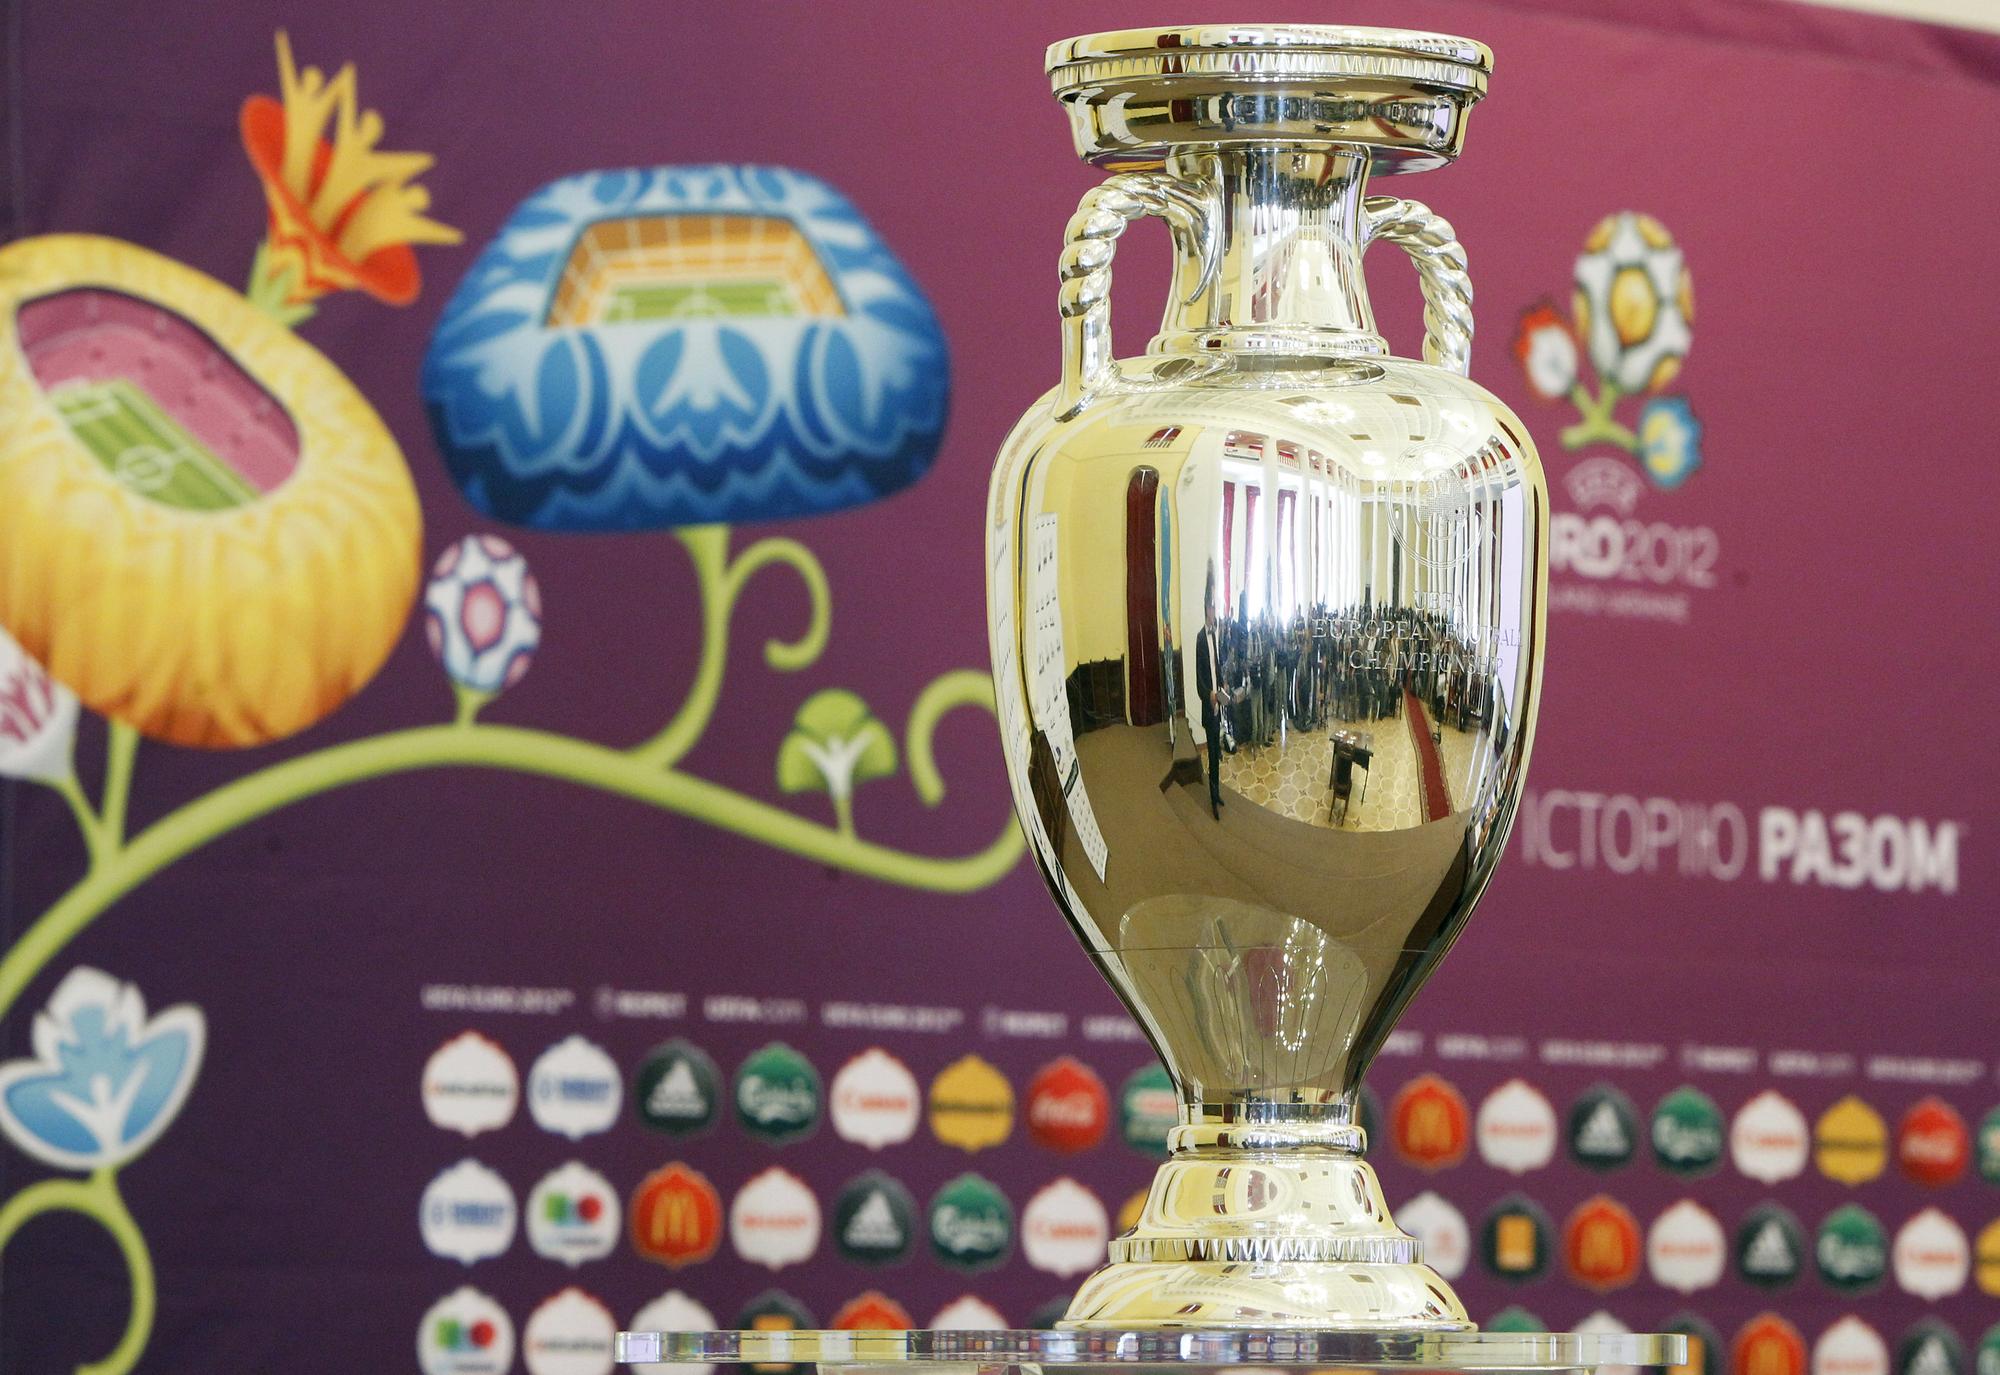 The Euro 2012 trophy is seen during its presentation ceremony before a parade through the streets of Kiev May 11, 2012. Kiev is set to host the final match of the Euro 2012 soccer tournament. (Trophy - Euro 2012) REUTERS/Gleb Garanich (UKRAINE - Tags: SPORT SOCCER) [REUTERS - Gleb Garanich]